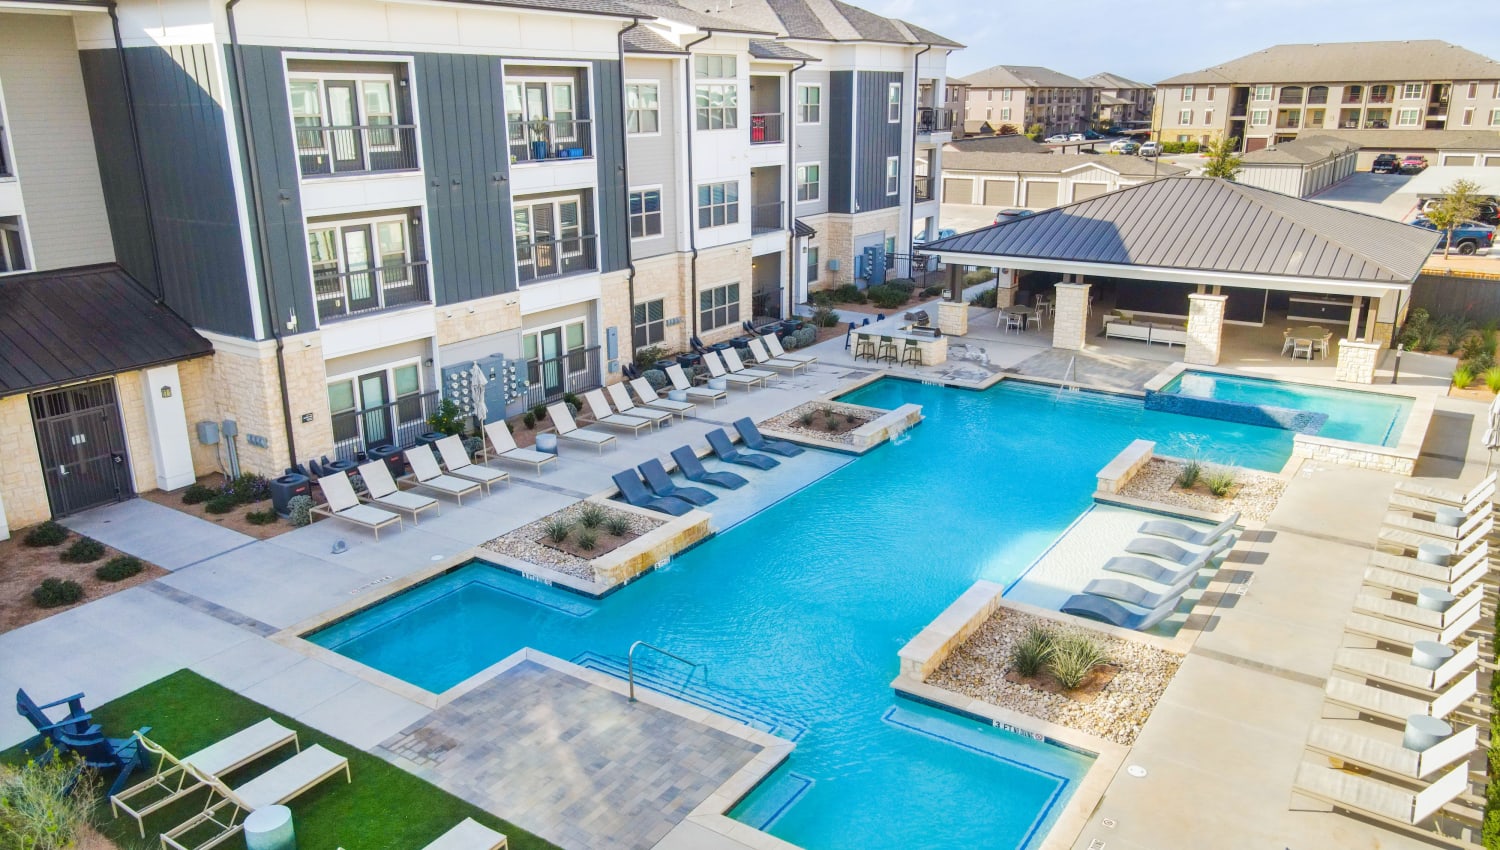 Swimming pool with pool-side seating at The Everett at Ally Village in Midland, Texas